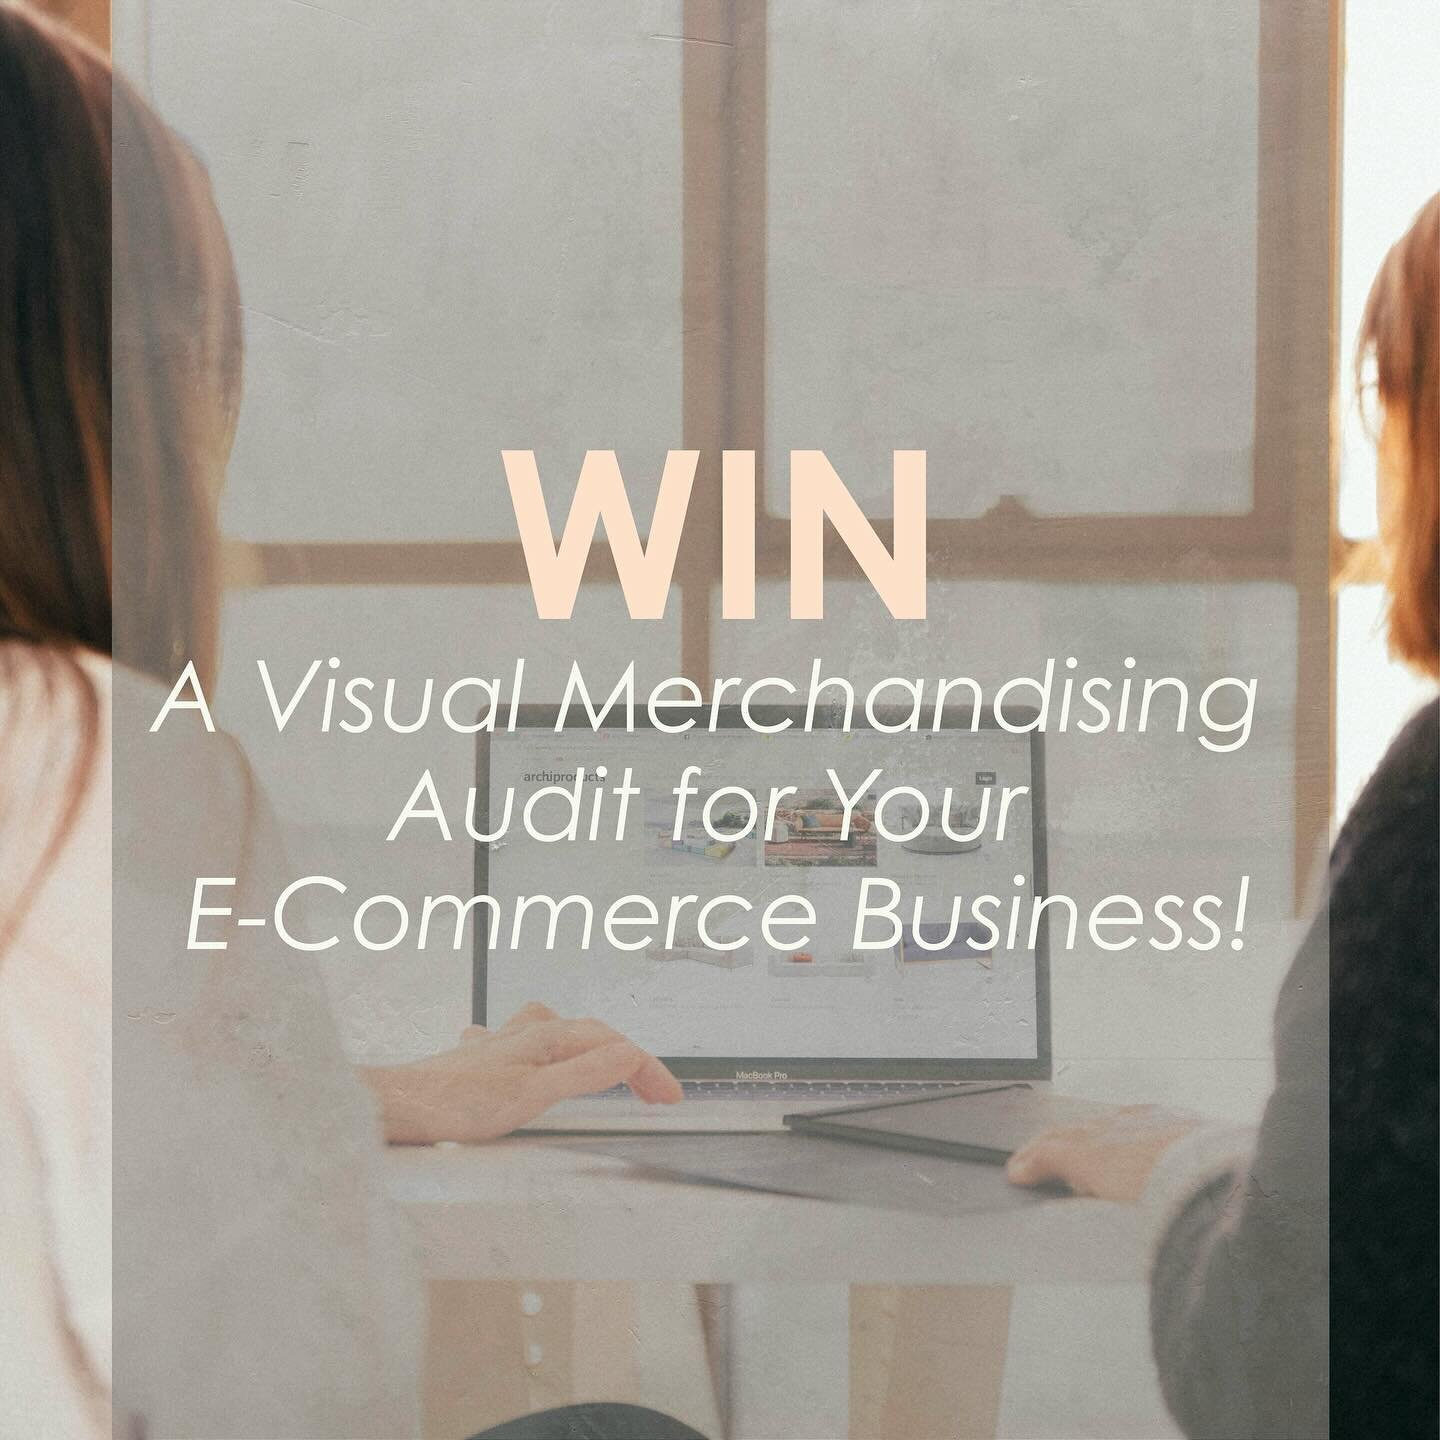 🎉 GIVEAWAY ALERT! 🎉 WIN A VISUAL MERCHANDISING AUDIT FOR YOUR E-COMM BUSINESS!

We&rsquo;re thrilled to announce we&rsquo;re officially launching our E-Commerce Merchandising Packages on April 2nd for all e-commerce businesses! 💻

Here are four im